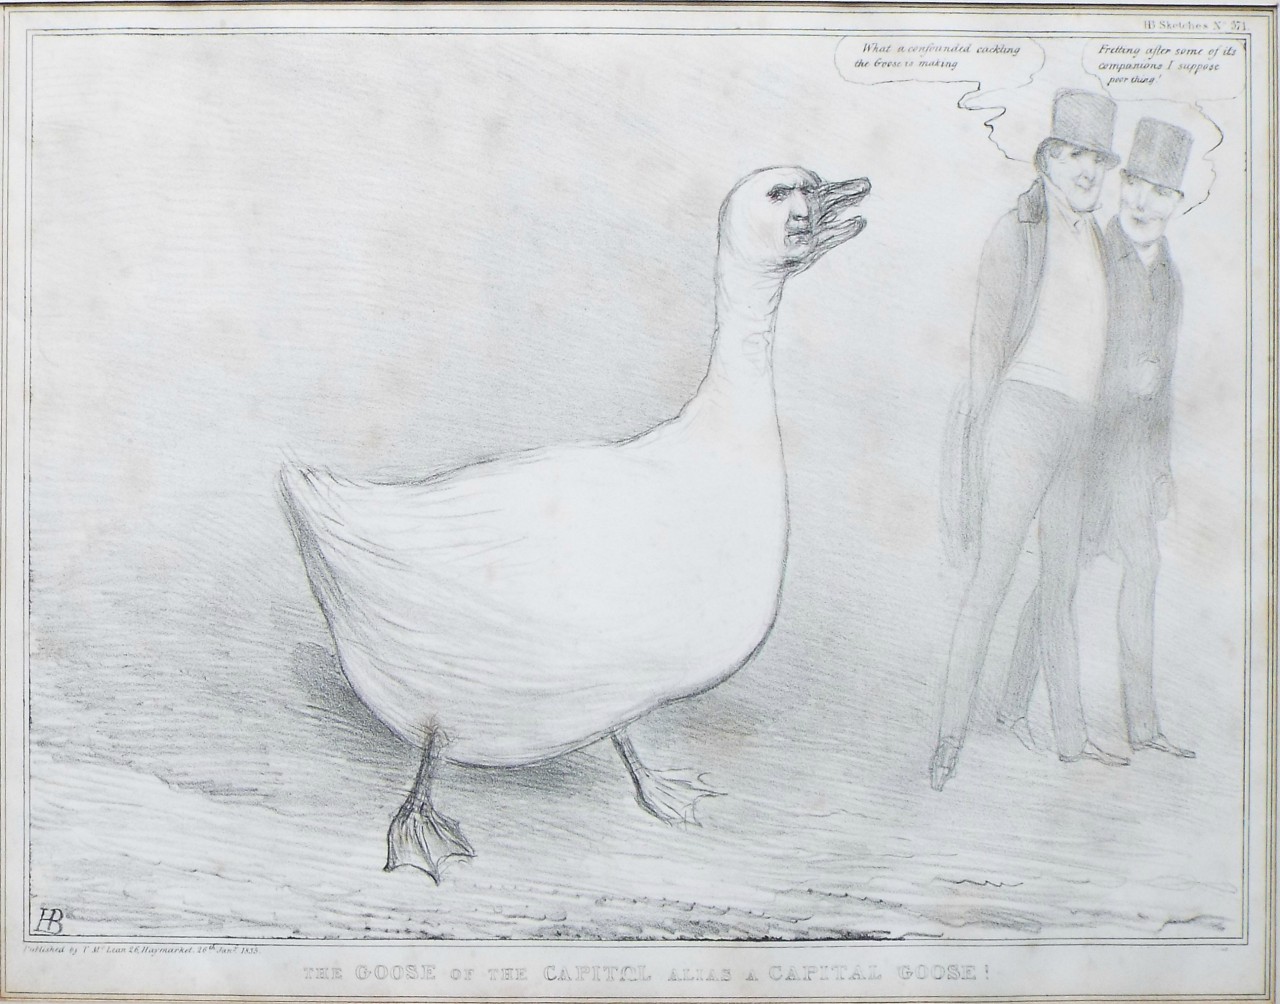 Lithograph - 371: The Goose of the Capitol Alia a Capital Goose.